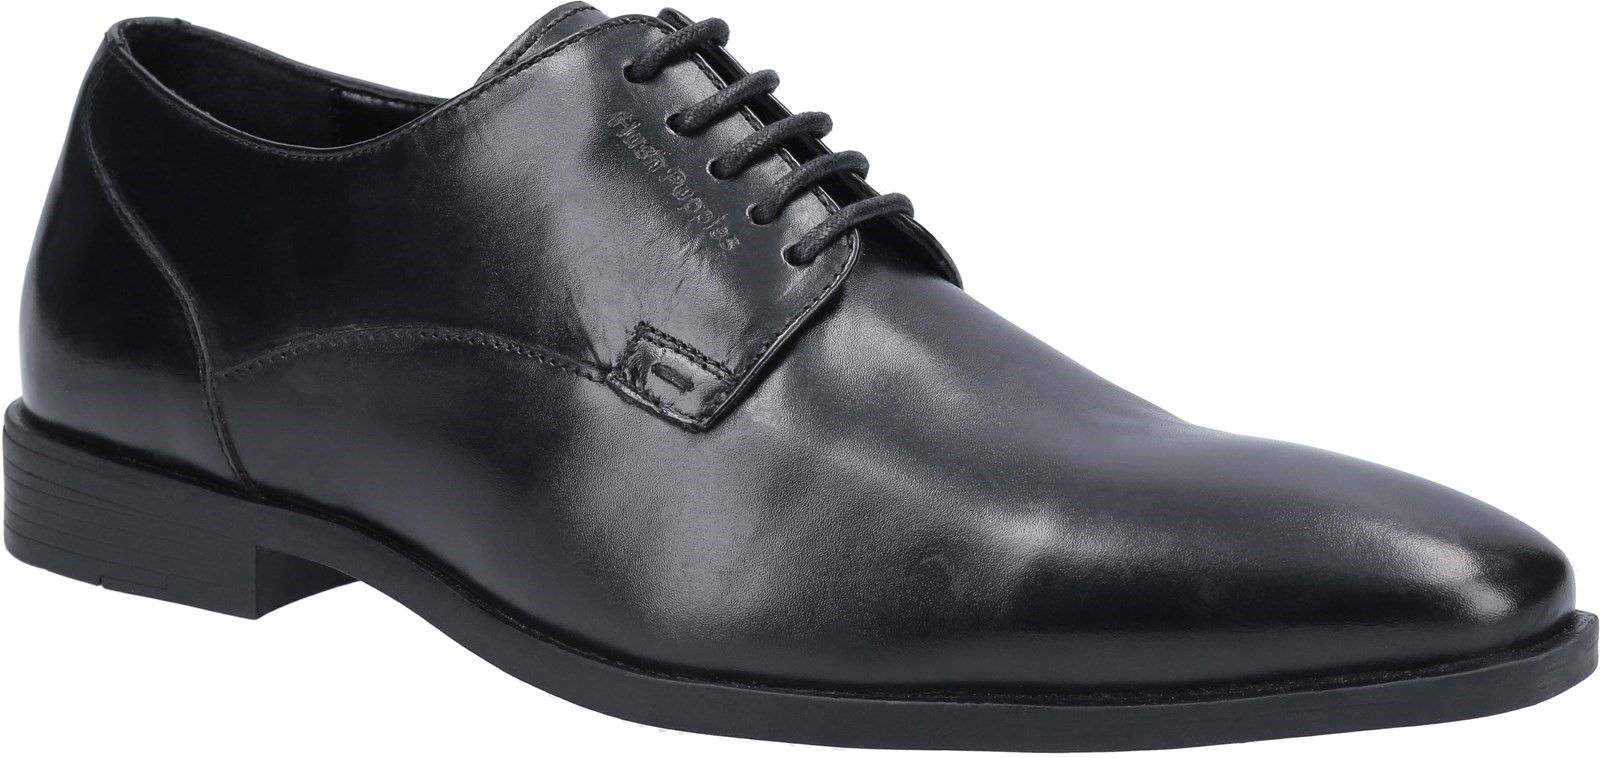 Ezra Plain Toe lace up shoe from Hush Puppies; Ezra is crafted with leather and has a memory foam footbed. The lightweight, flexible sole unit makes this the perfect smart footwear all day.Smart Leather Upper. 
Square toe. 
Hardwearing Rubber outsole. 
Memory Foam Sock. 
Lace Up Fastening.